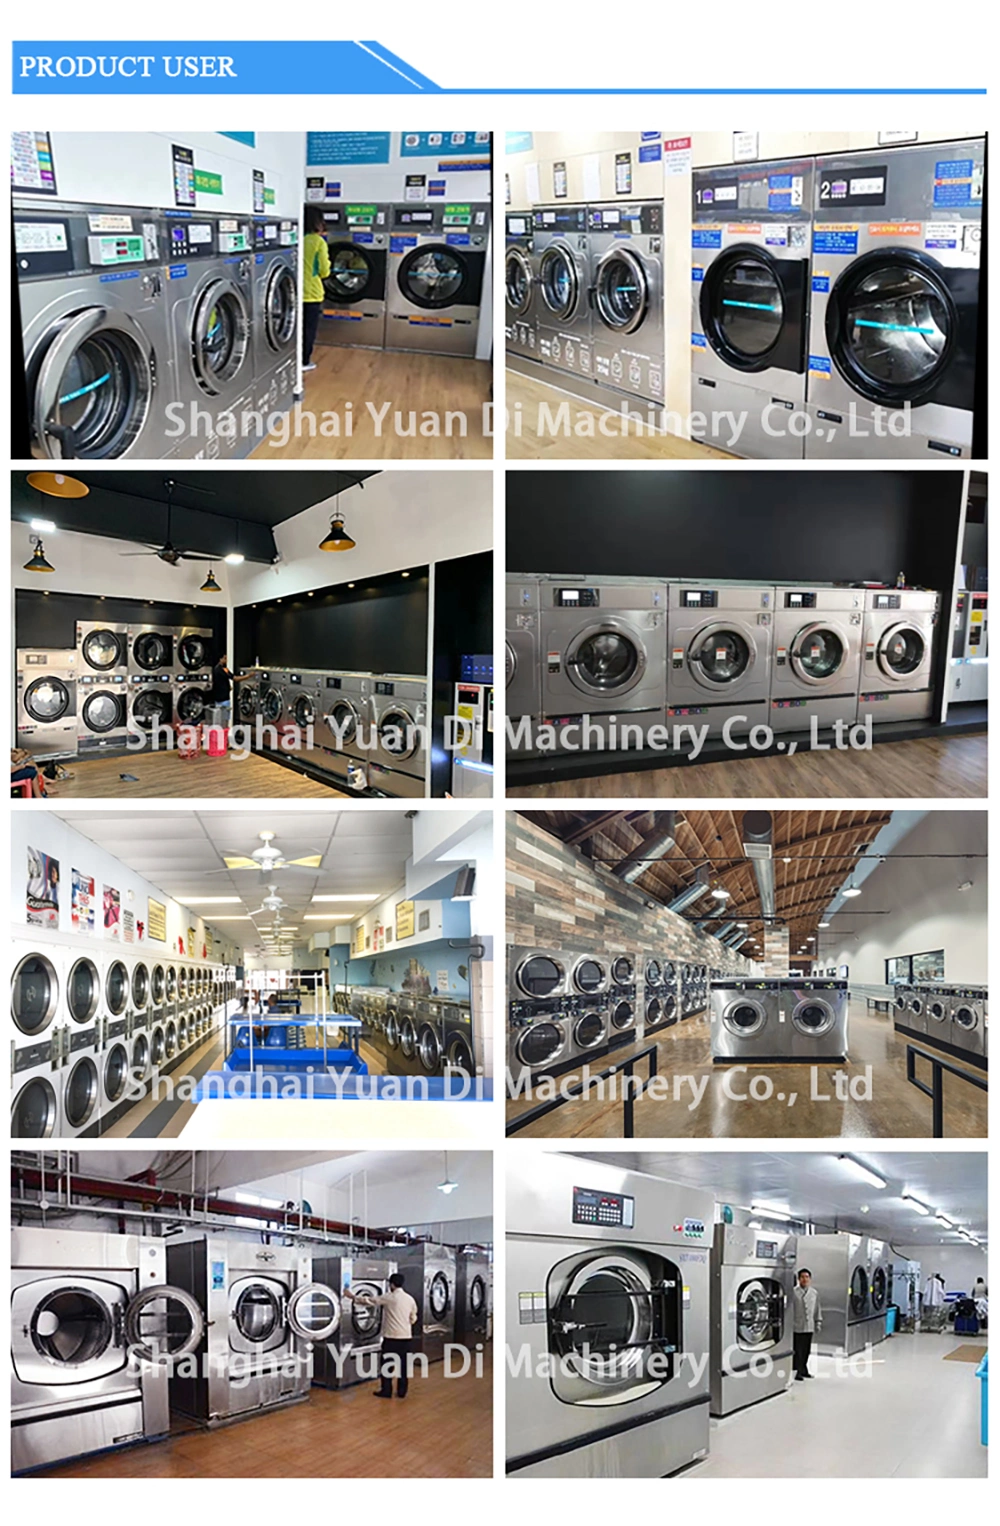 10kg-100kg Commercial Type Coin-Operated Washing Machine Price